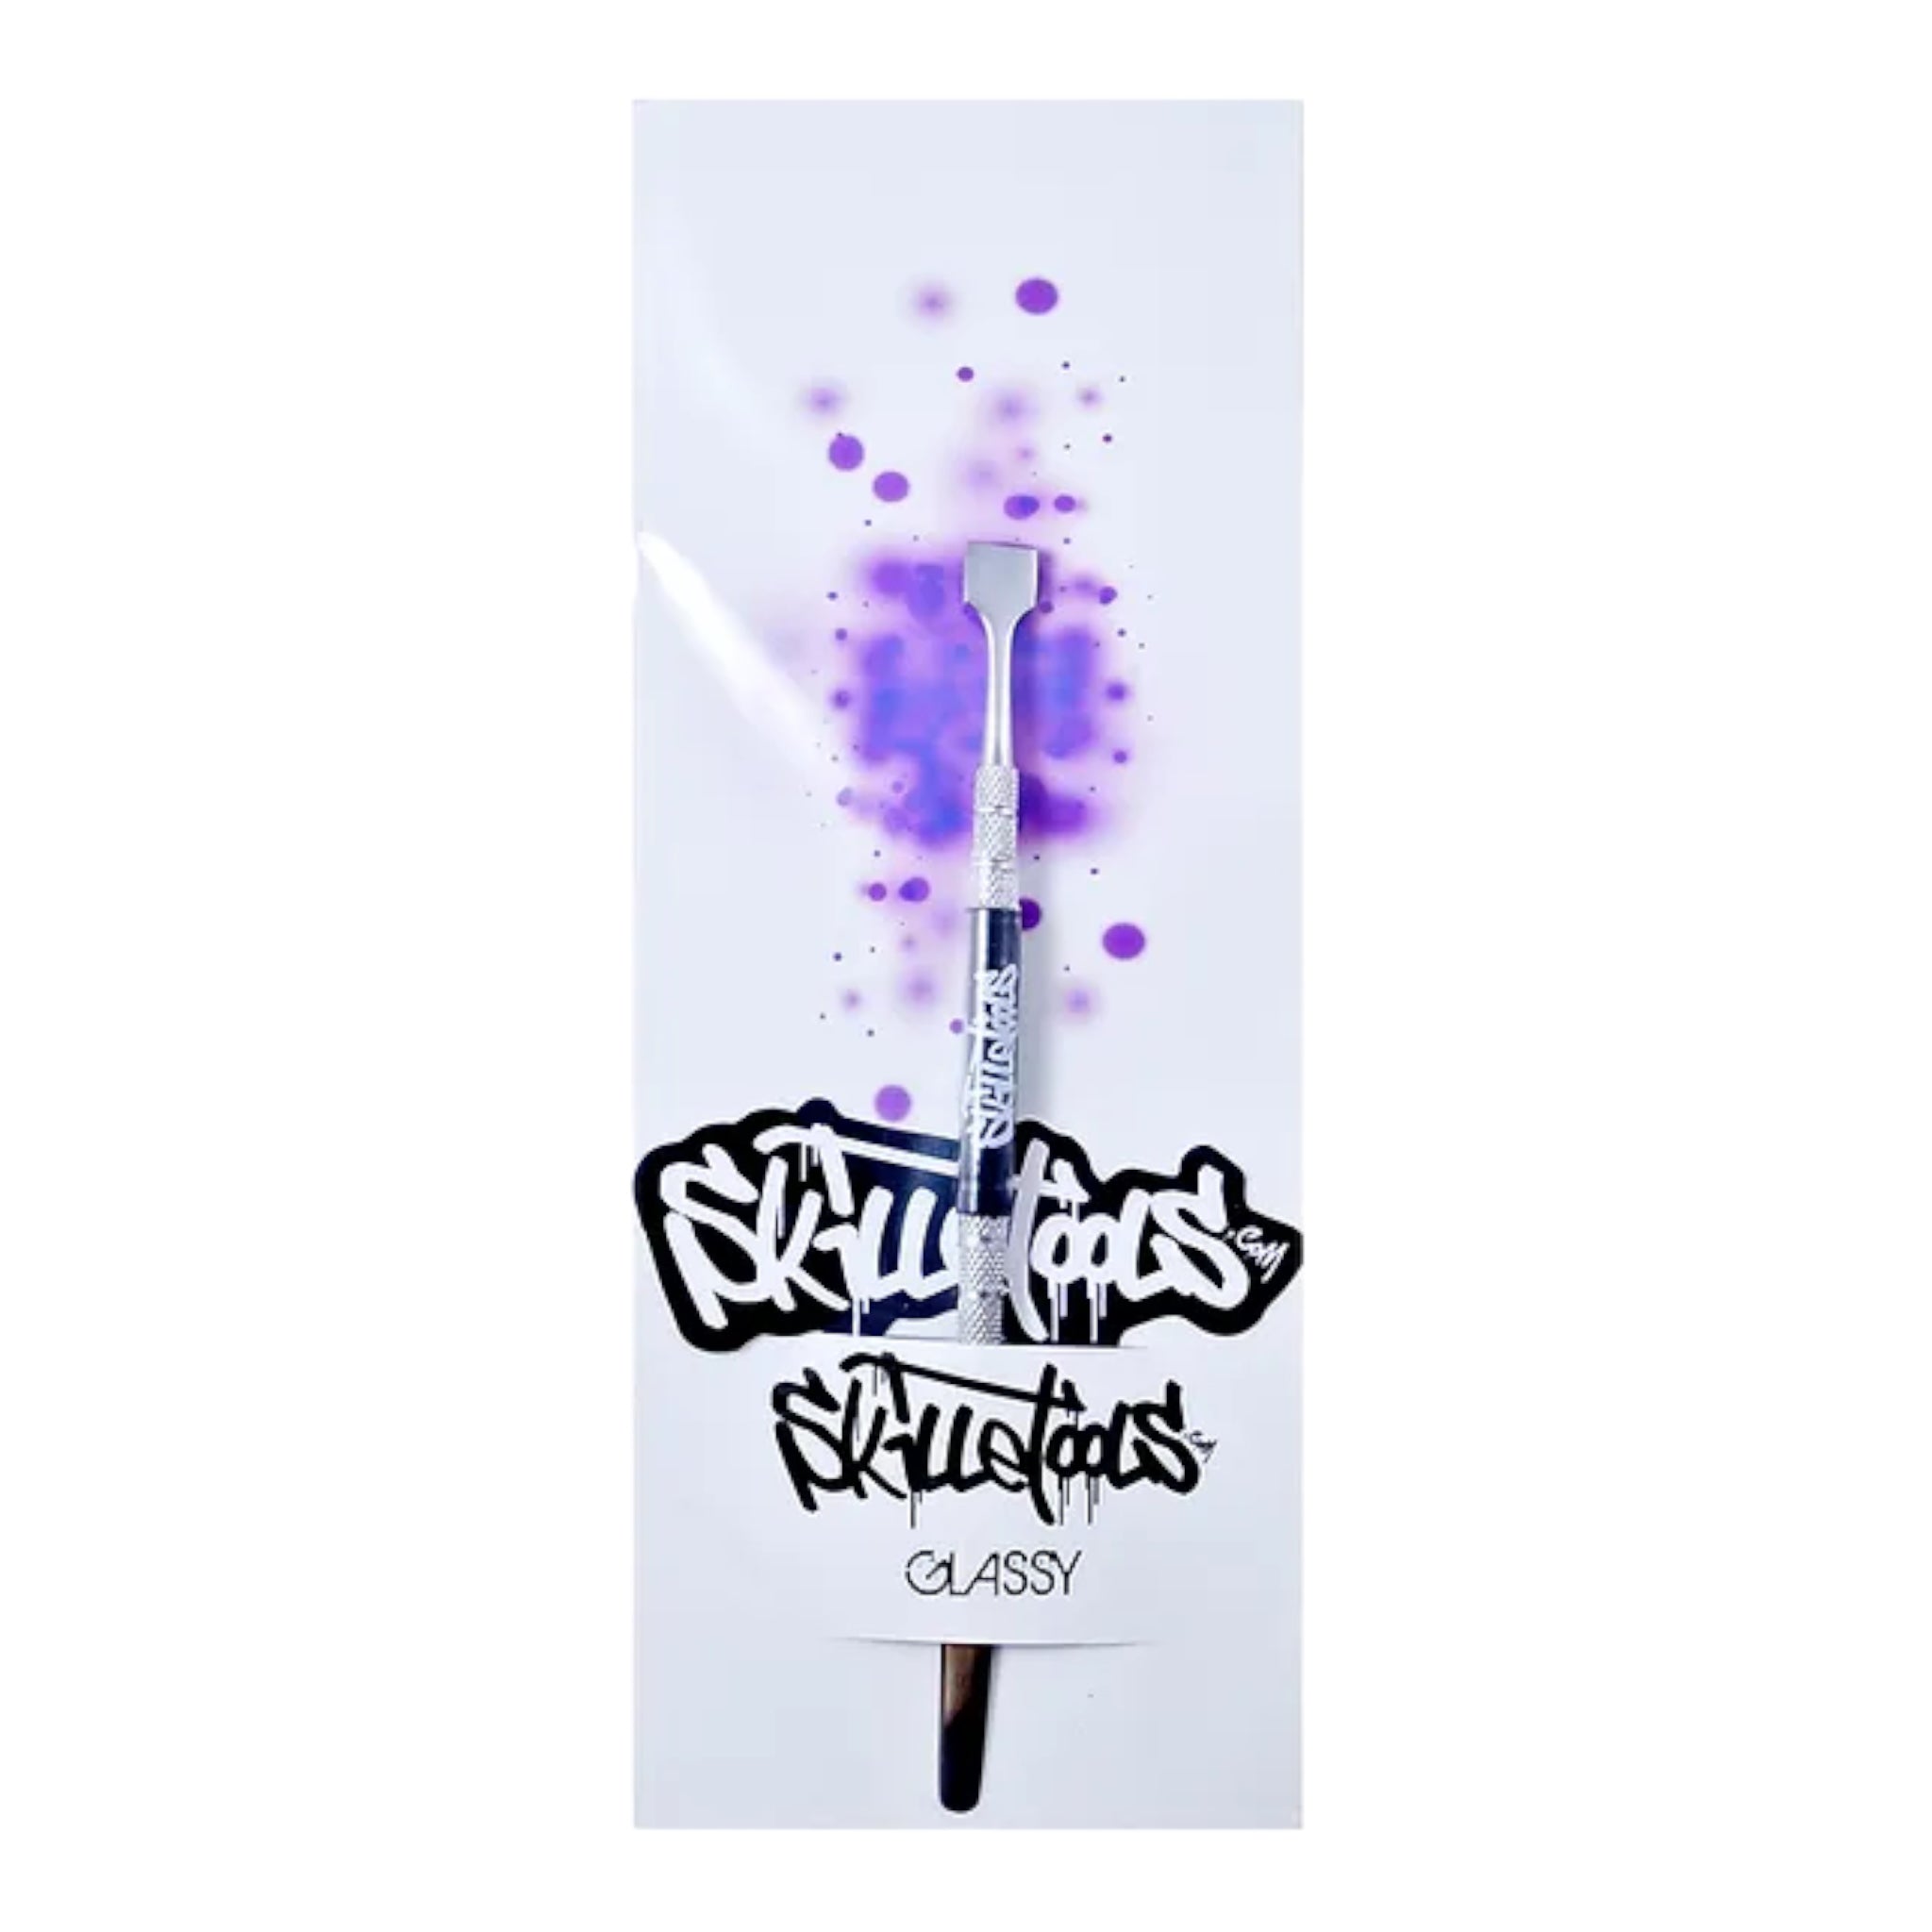 Skilletools - Glassy - Stainless Steel Double Sided Dab Tool